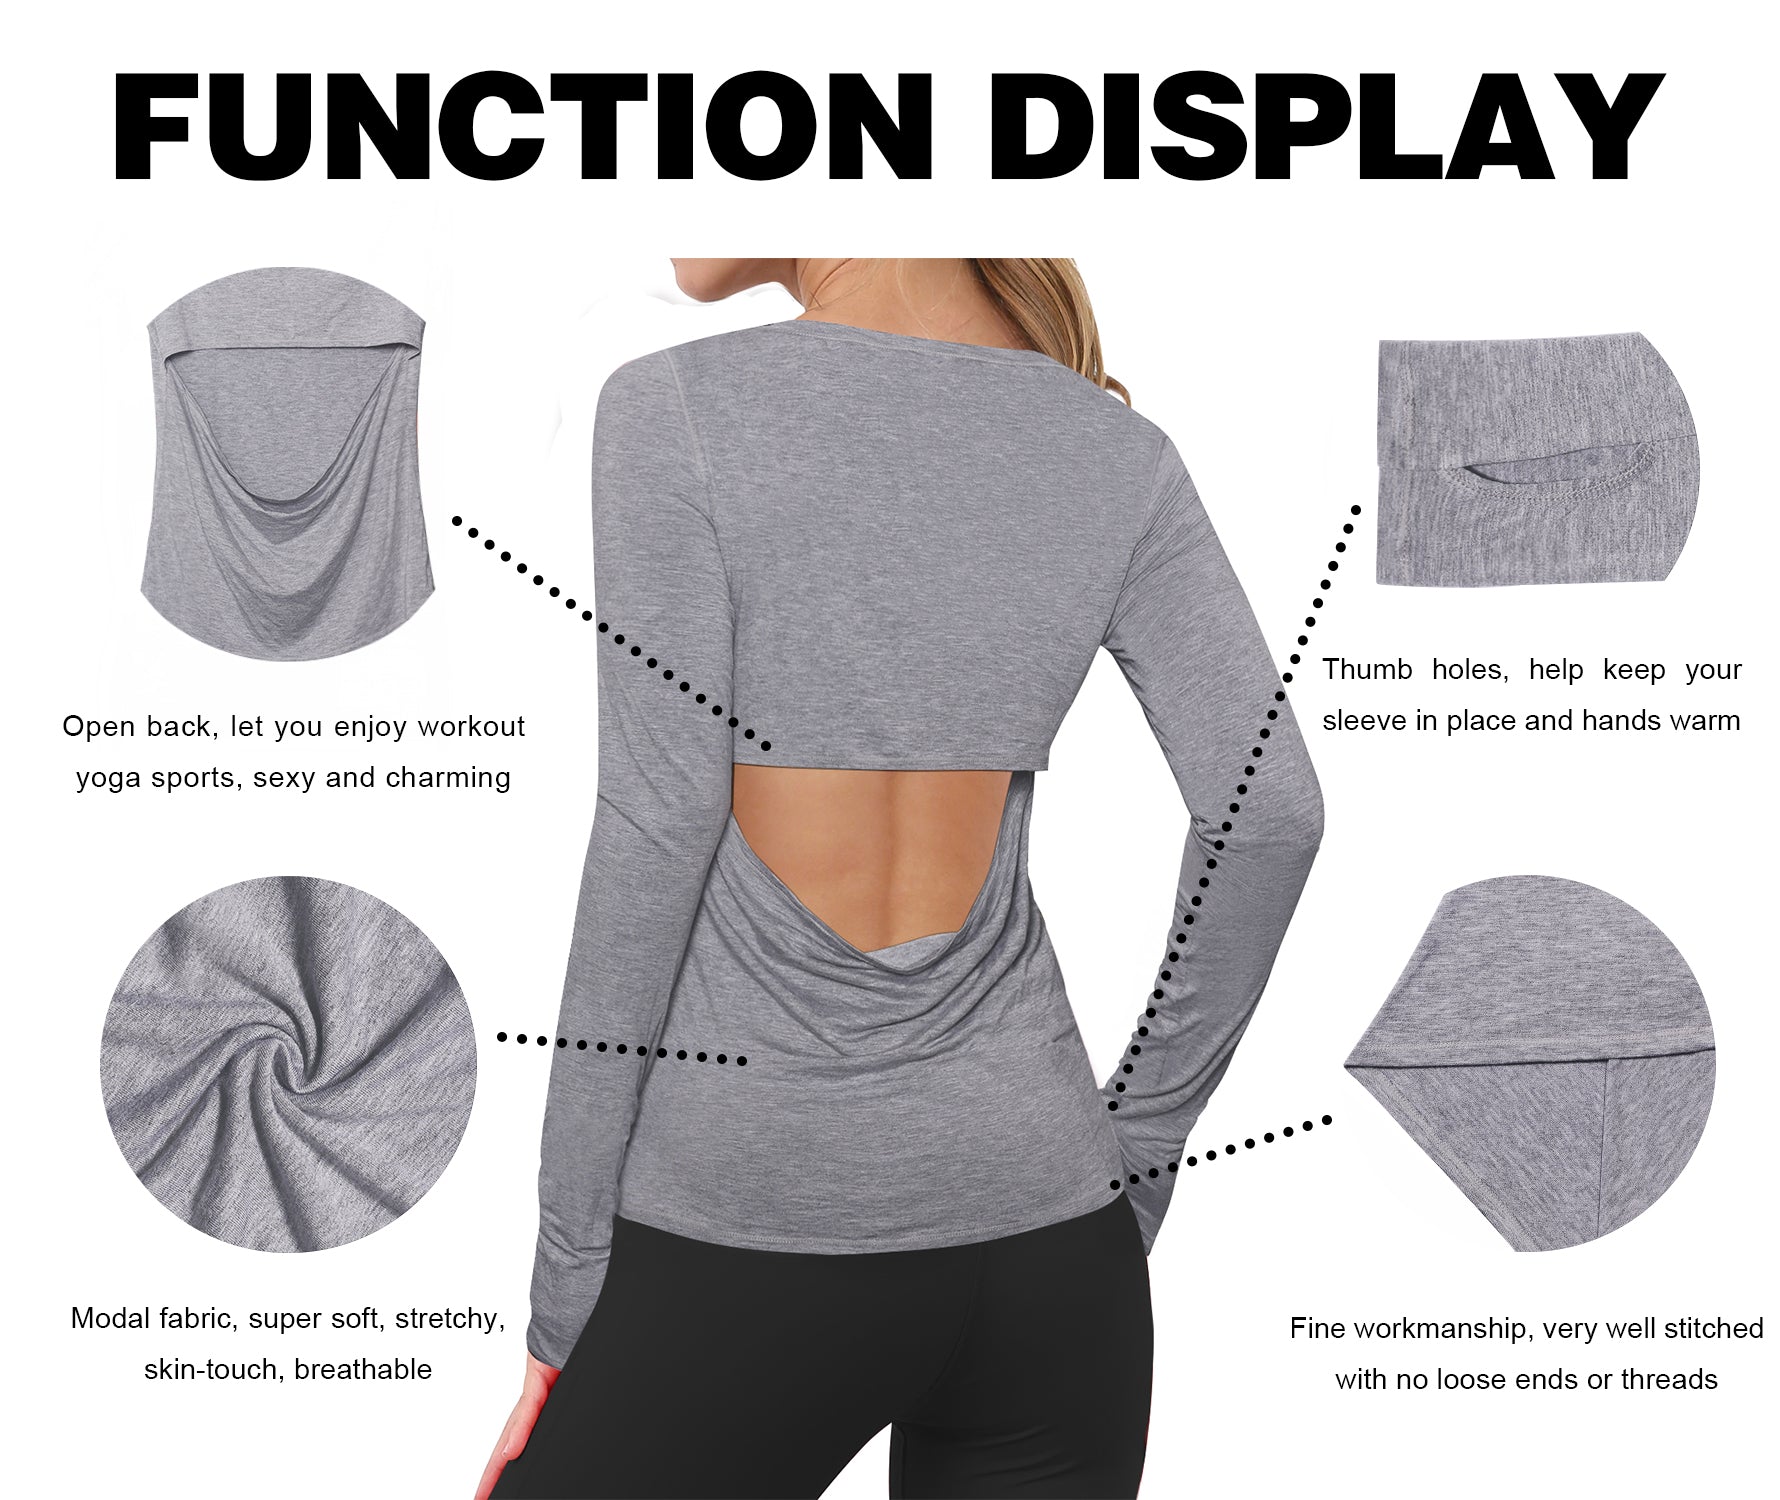 Open Back Long Sleeve Tops heathergray Designed for On the Move Slim fit 93%Modal/7%Spandex Four-way stretch Naturally breathable Super-Soft, Modal Fabric